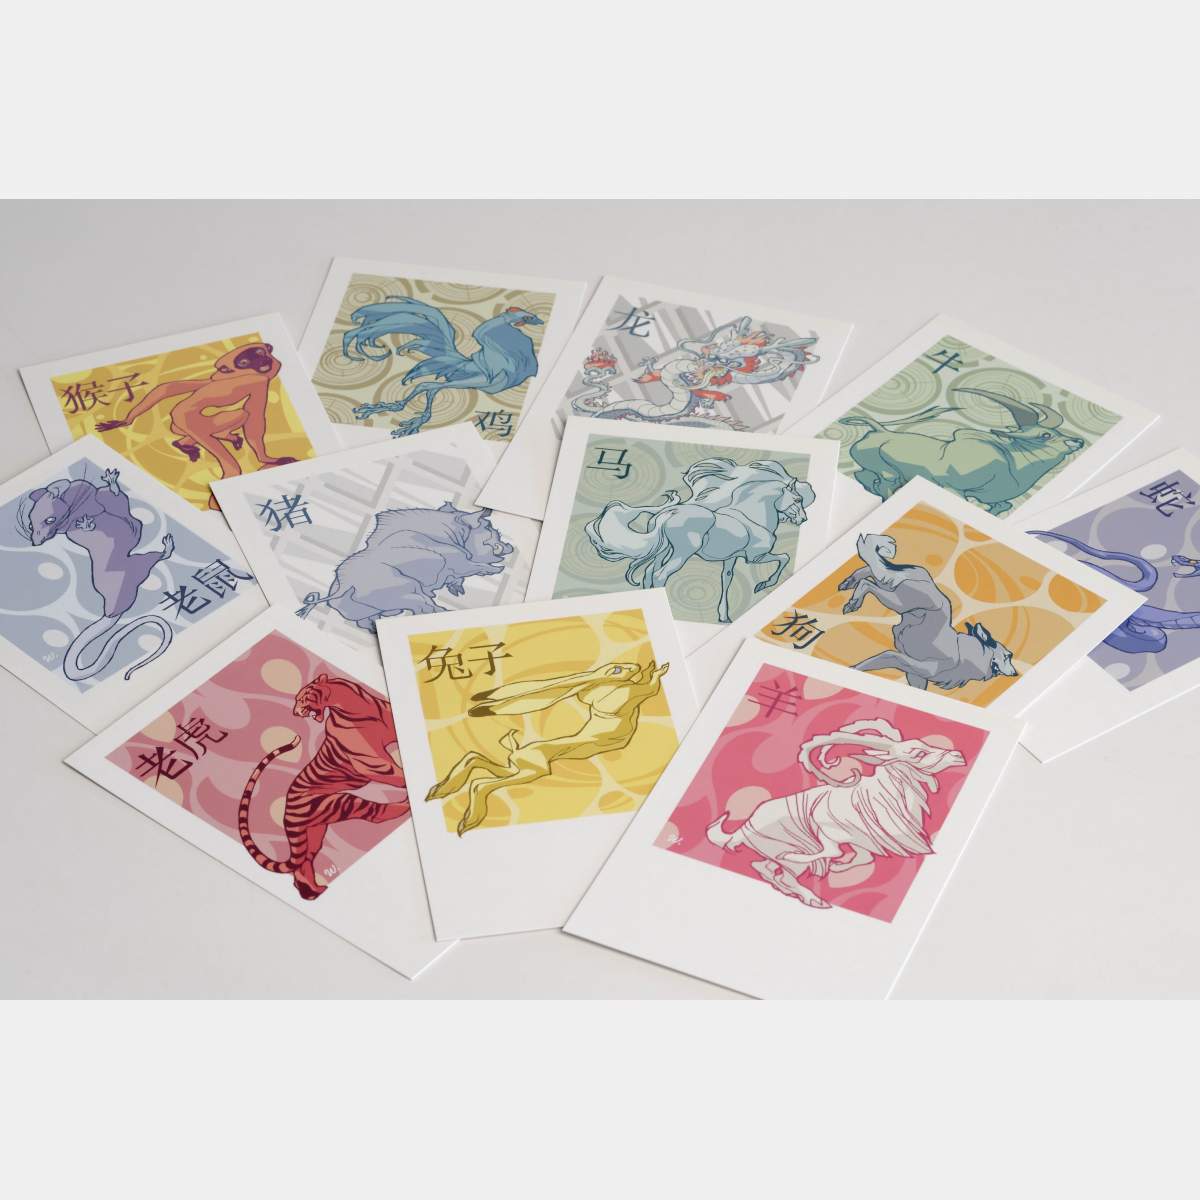 Claire Wendling - Cartes postales 'Zodiac chinois'